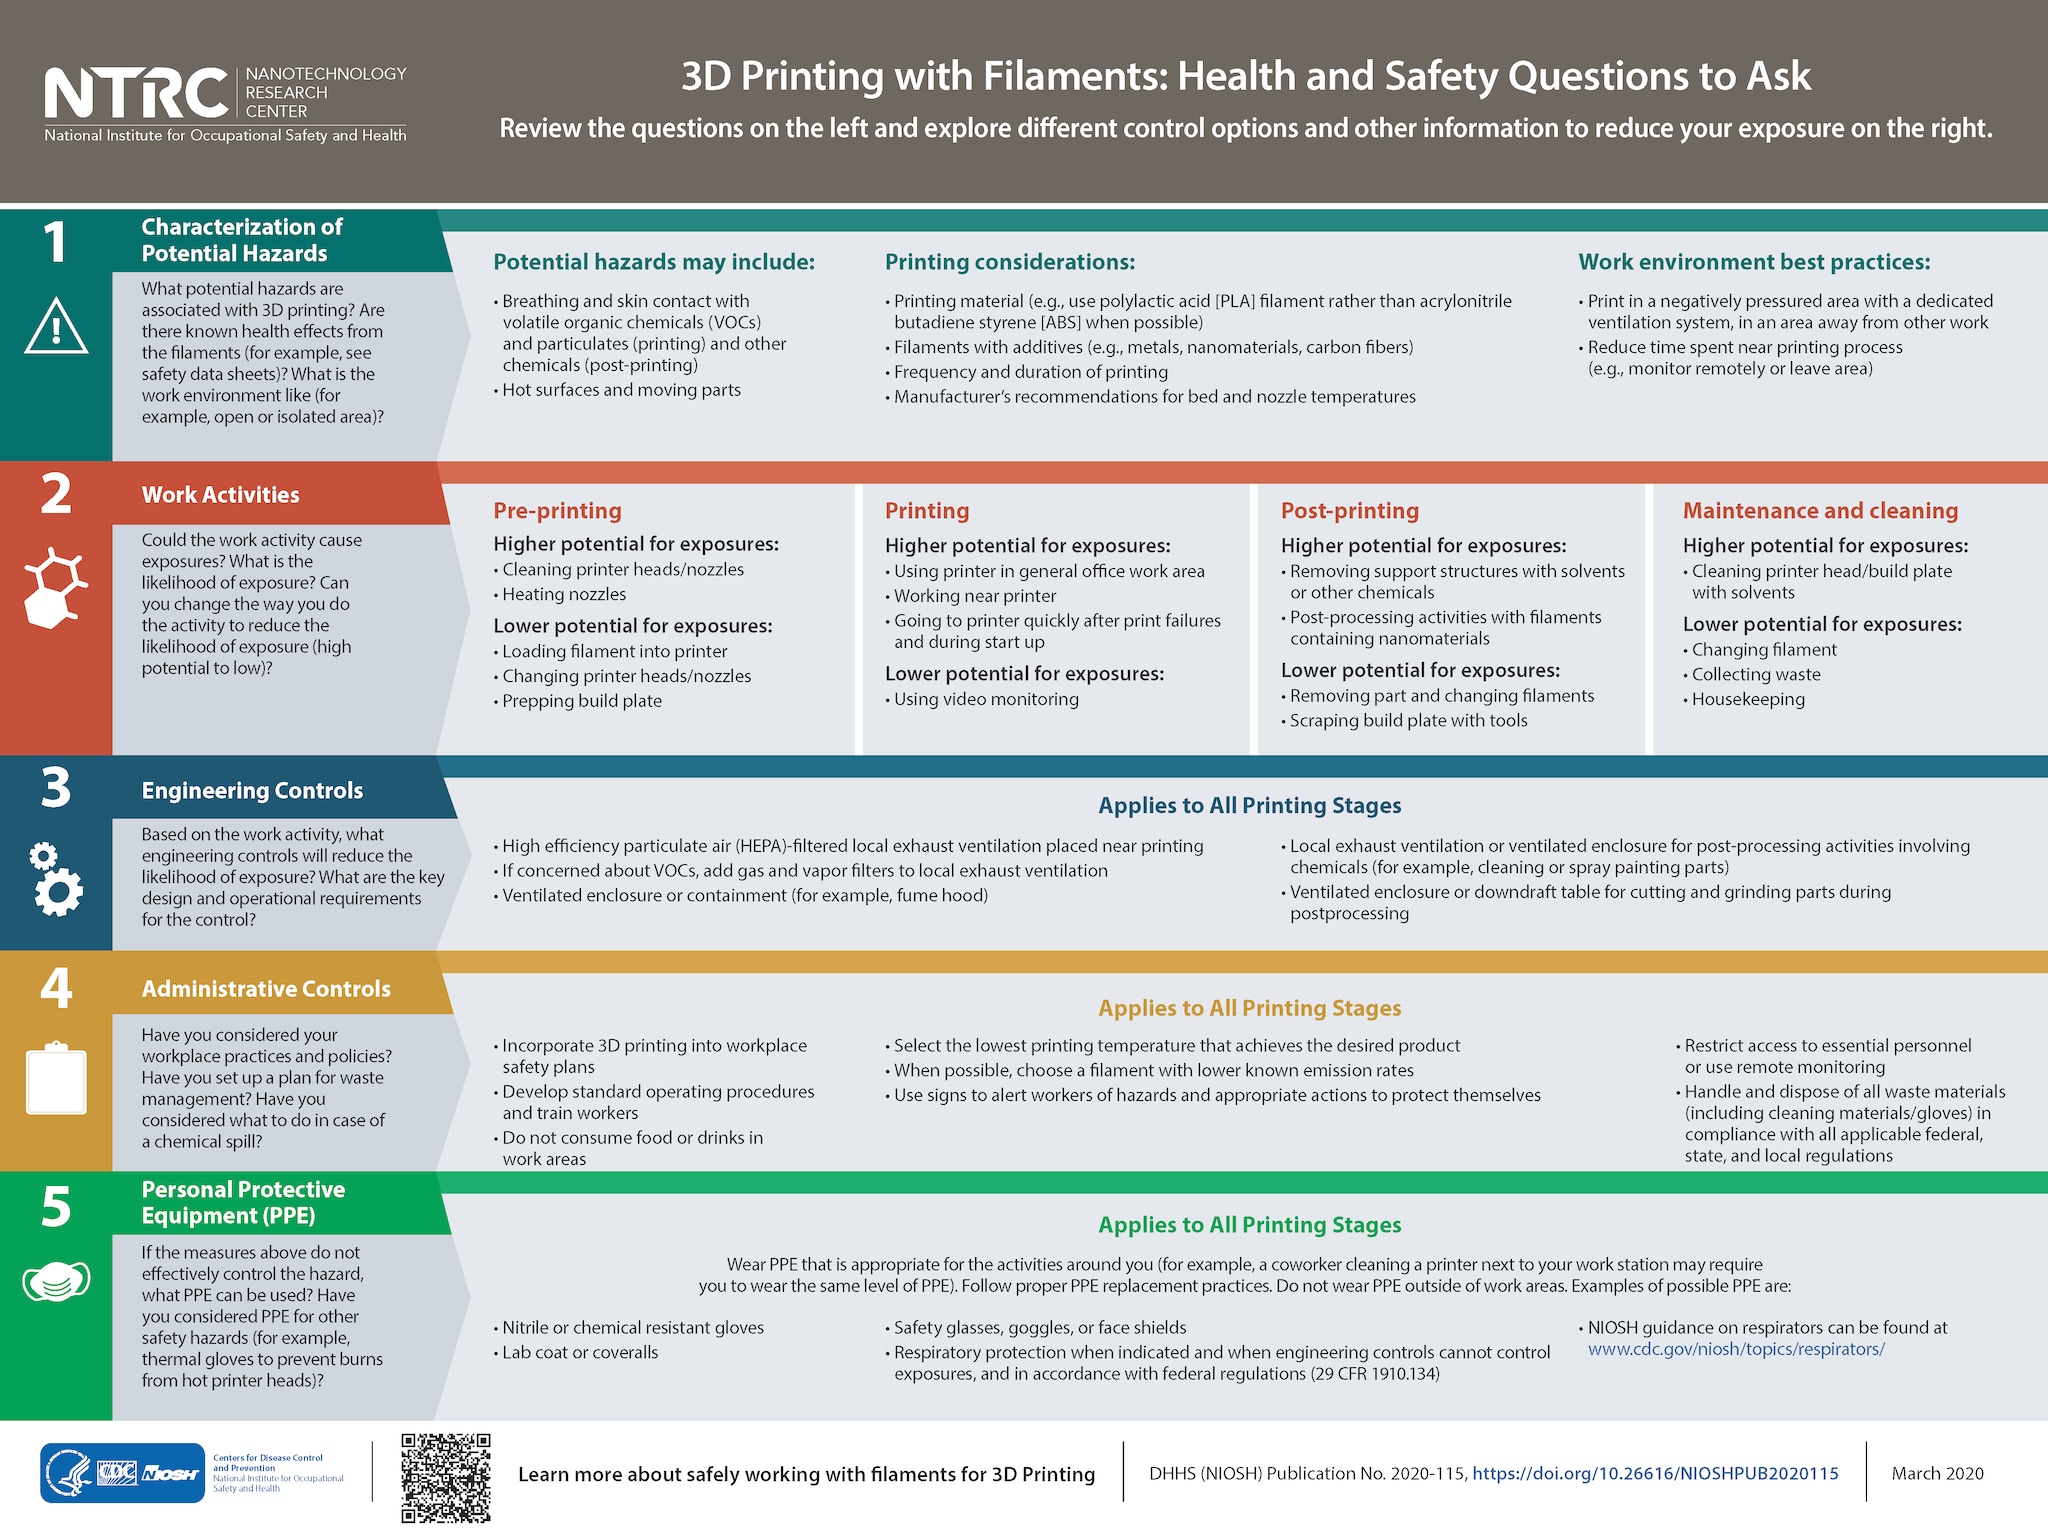 This poster from the NIOSH Nanotechnology Research Center cites health and safety questions with different control options and information to reduce exposure to potential hazards when 3D printing with Filaments.